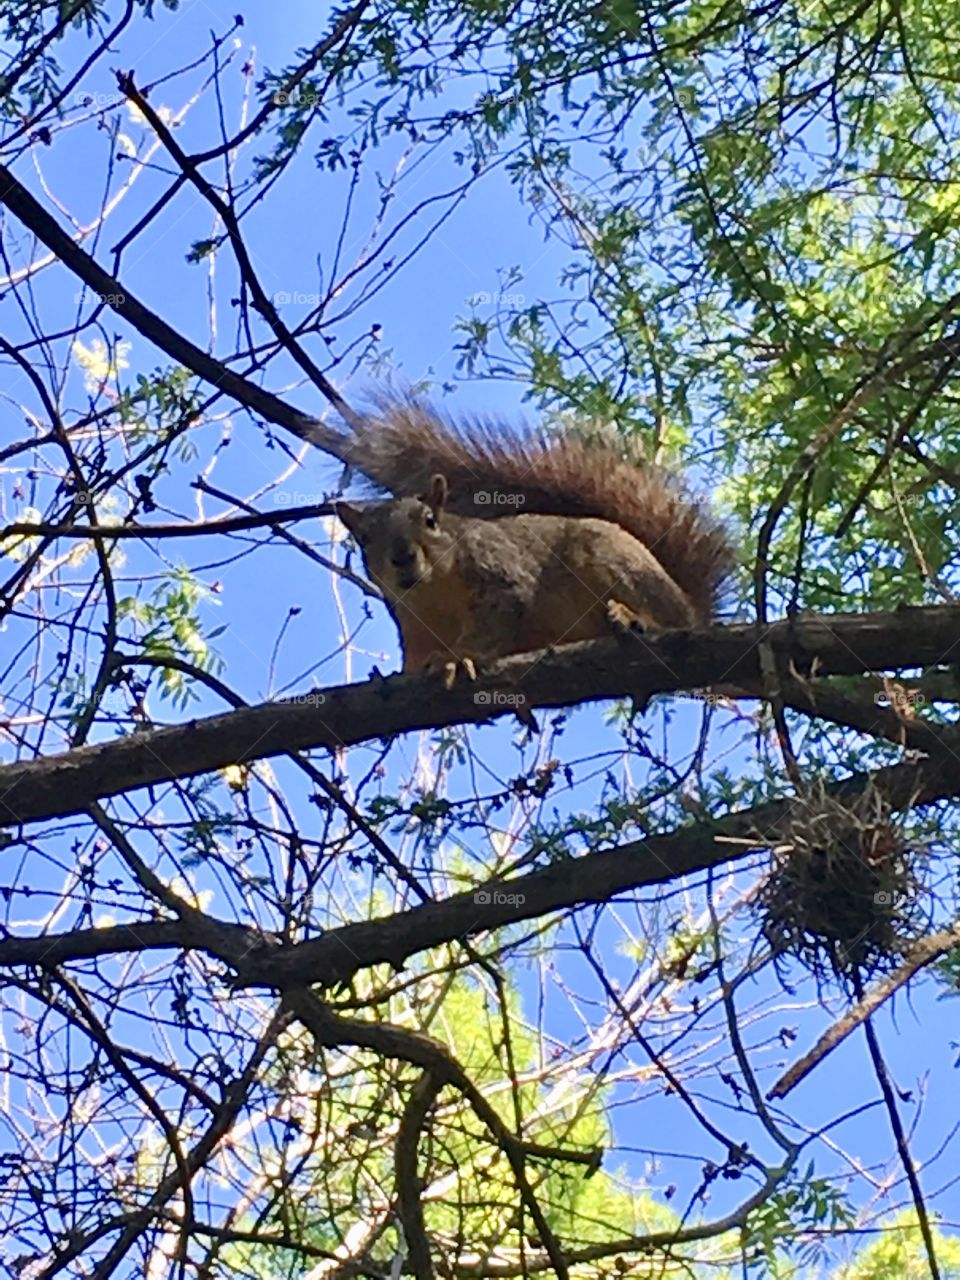 Squirrel on a branch, Brown squirrel, tree branch, blue sky, animals in nature